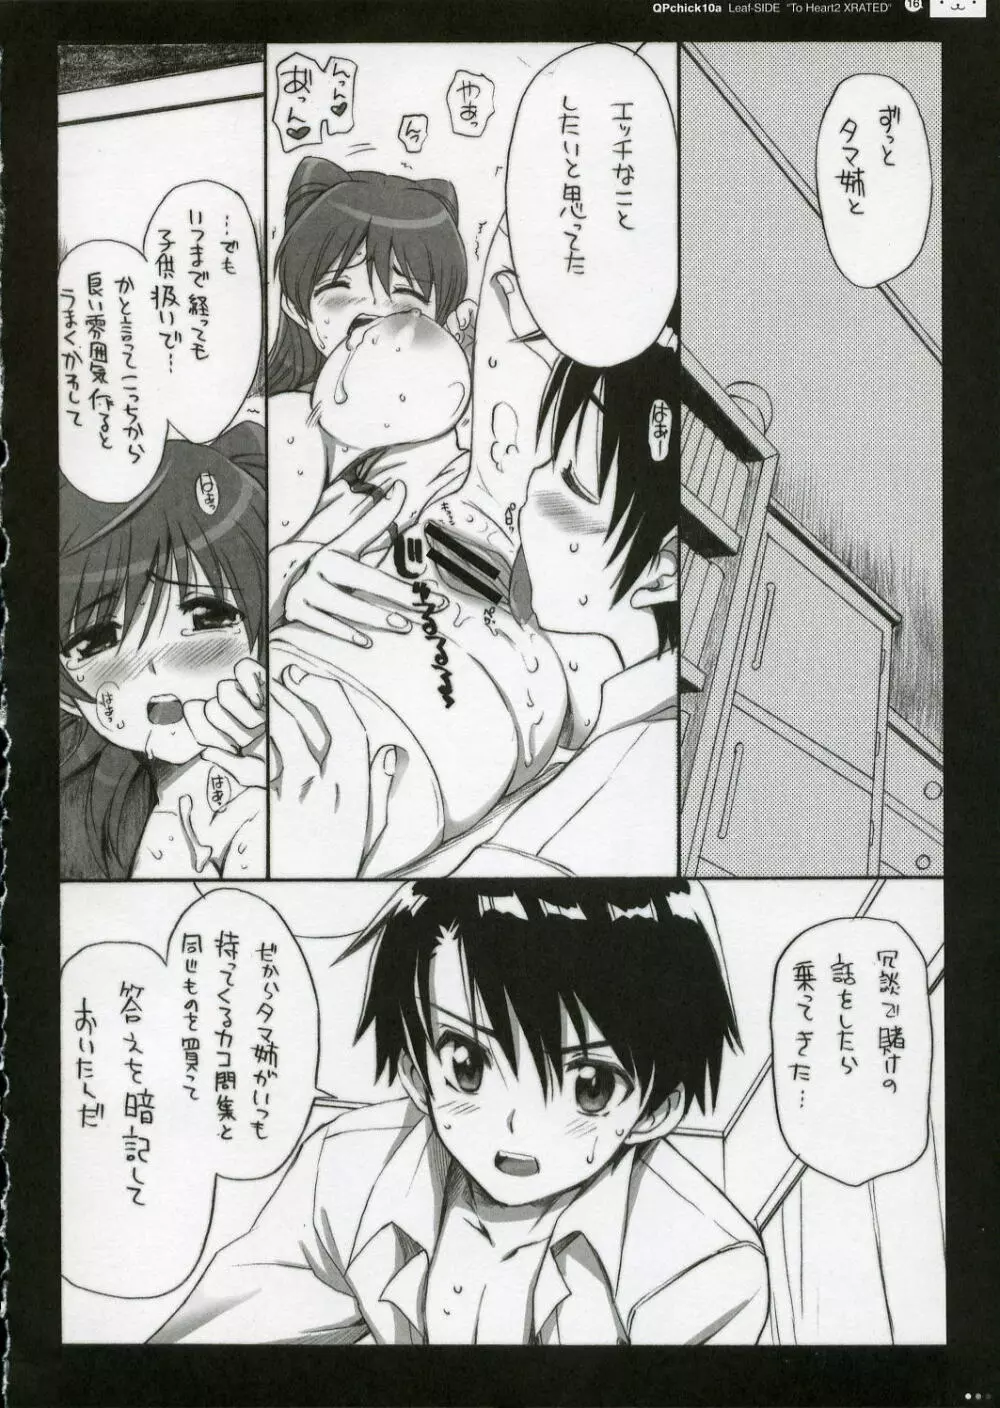 [QP:flapper (ぴめこ、トメ太)] QPchick10a Leaf-SIDE -Re:Re:CHERRY- (トゥハート2) [2006年4月] Page.19